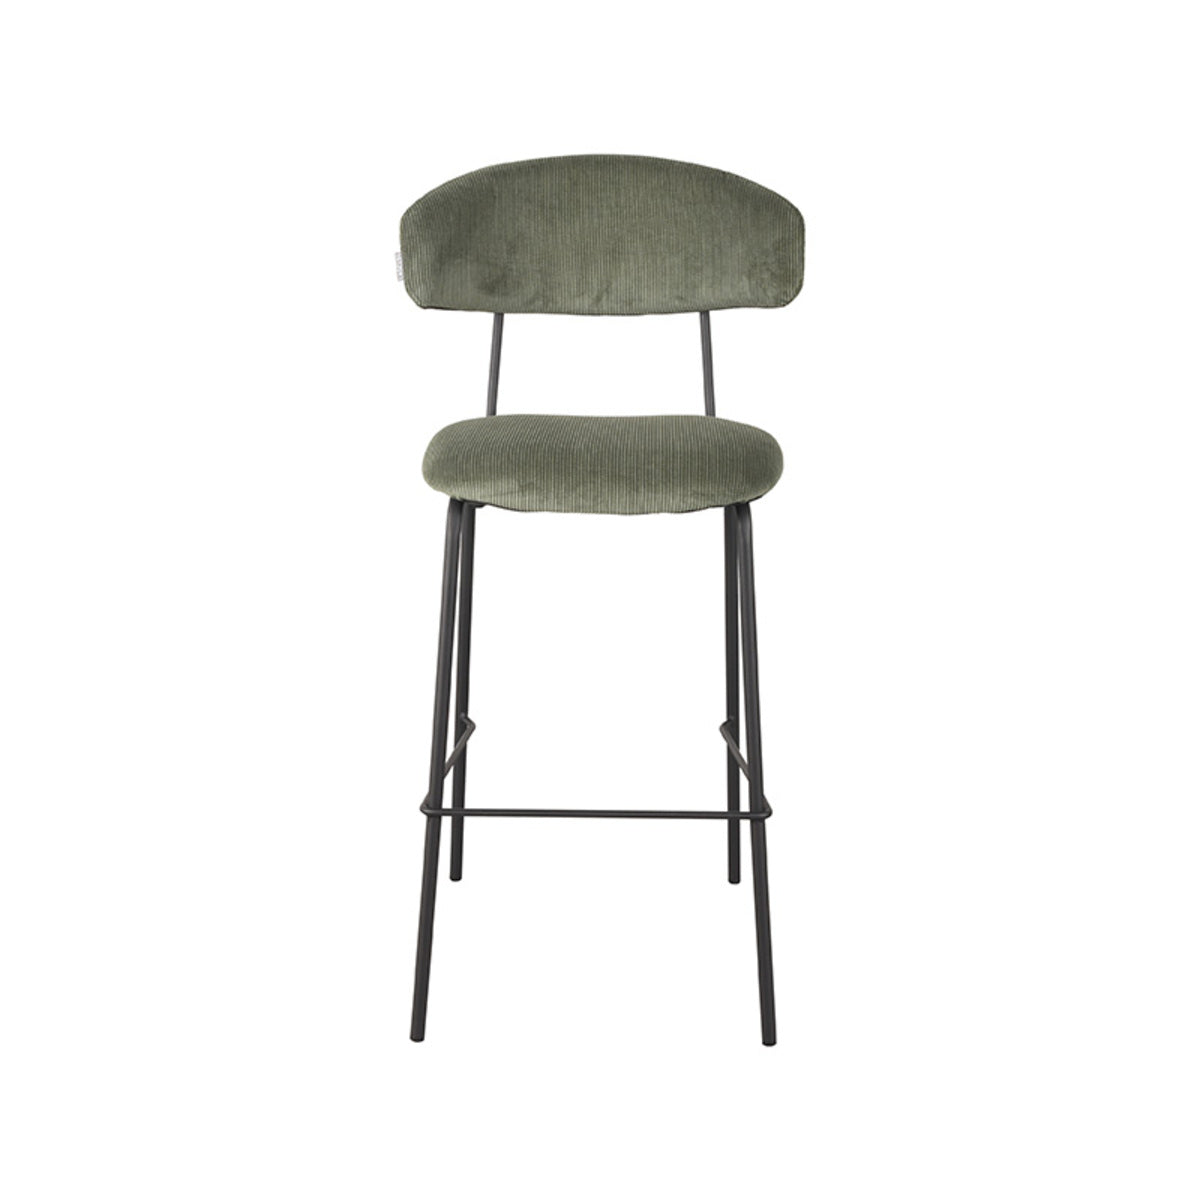 LABEL51 Bar stool Zack - Green - Ribcord - Seat height 78 | 2 pieces